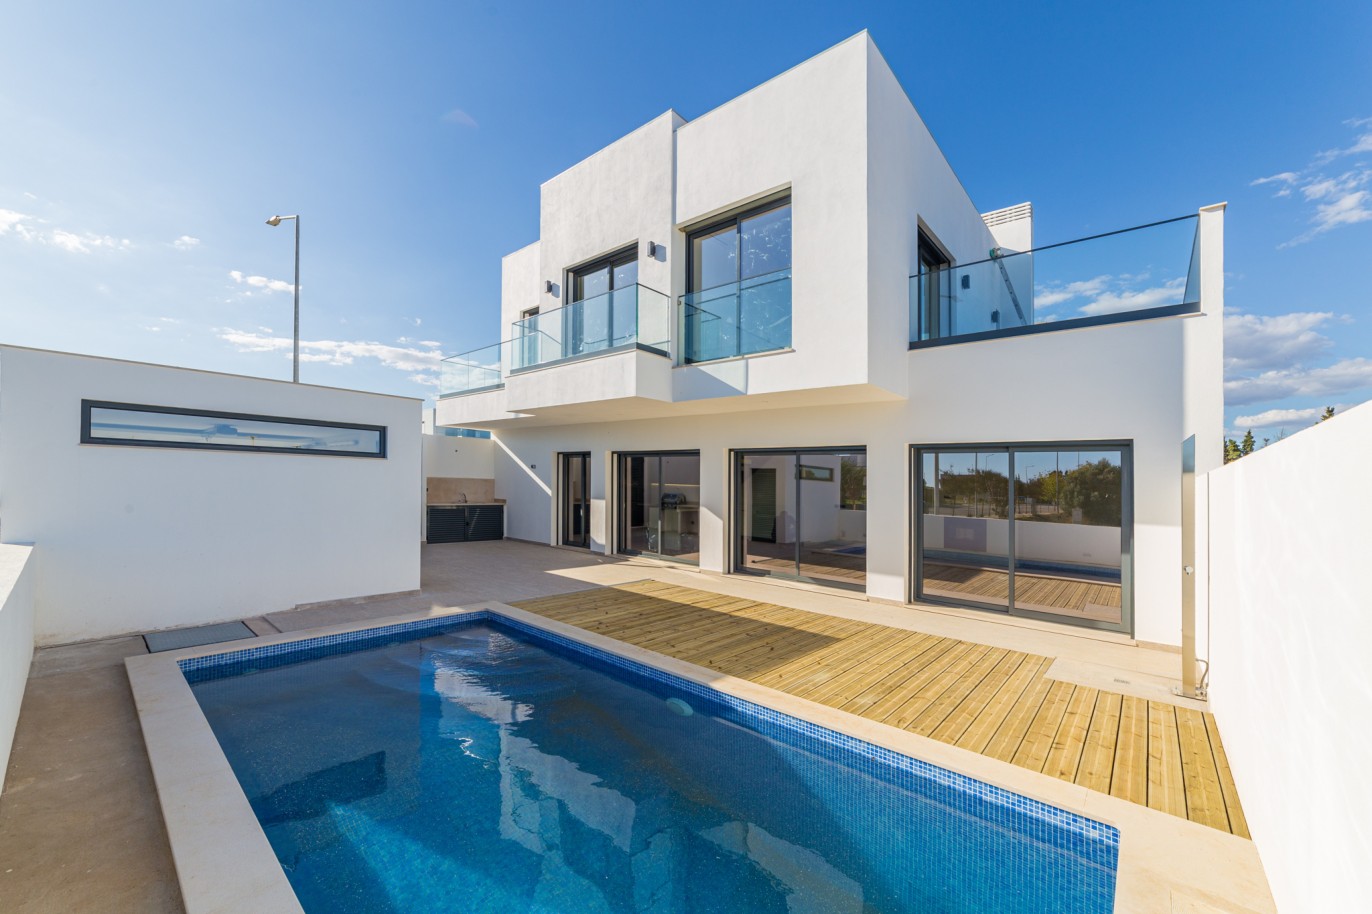 3 bedroom villa with pool and sea view, for sale in Tavira, Algarve_225843